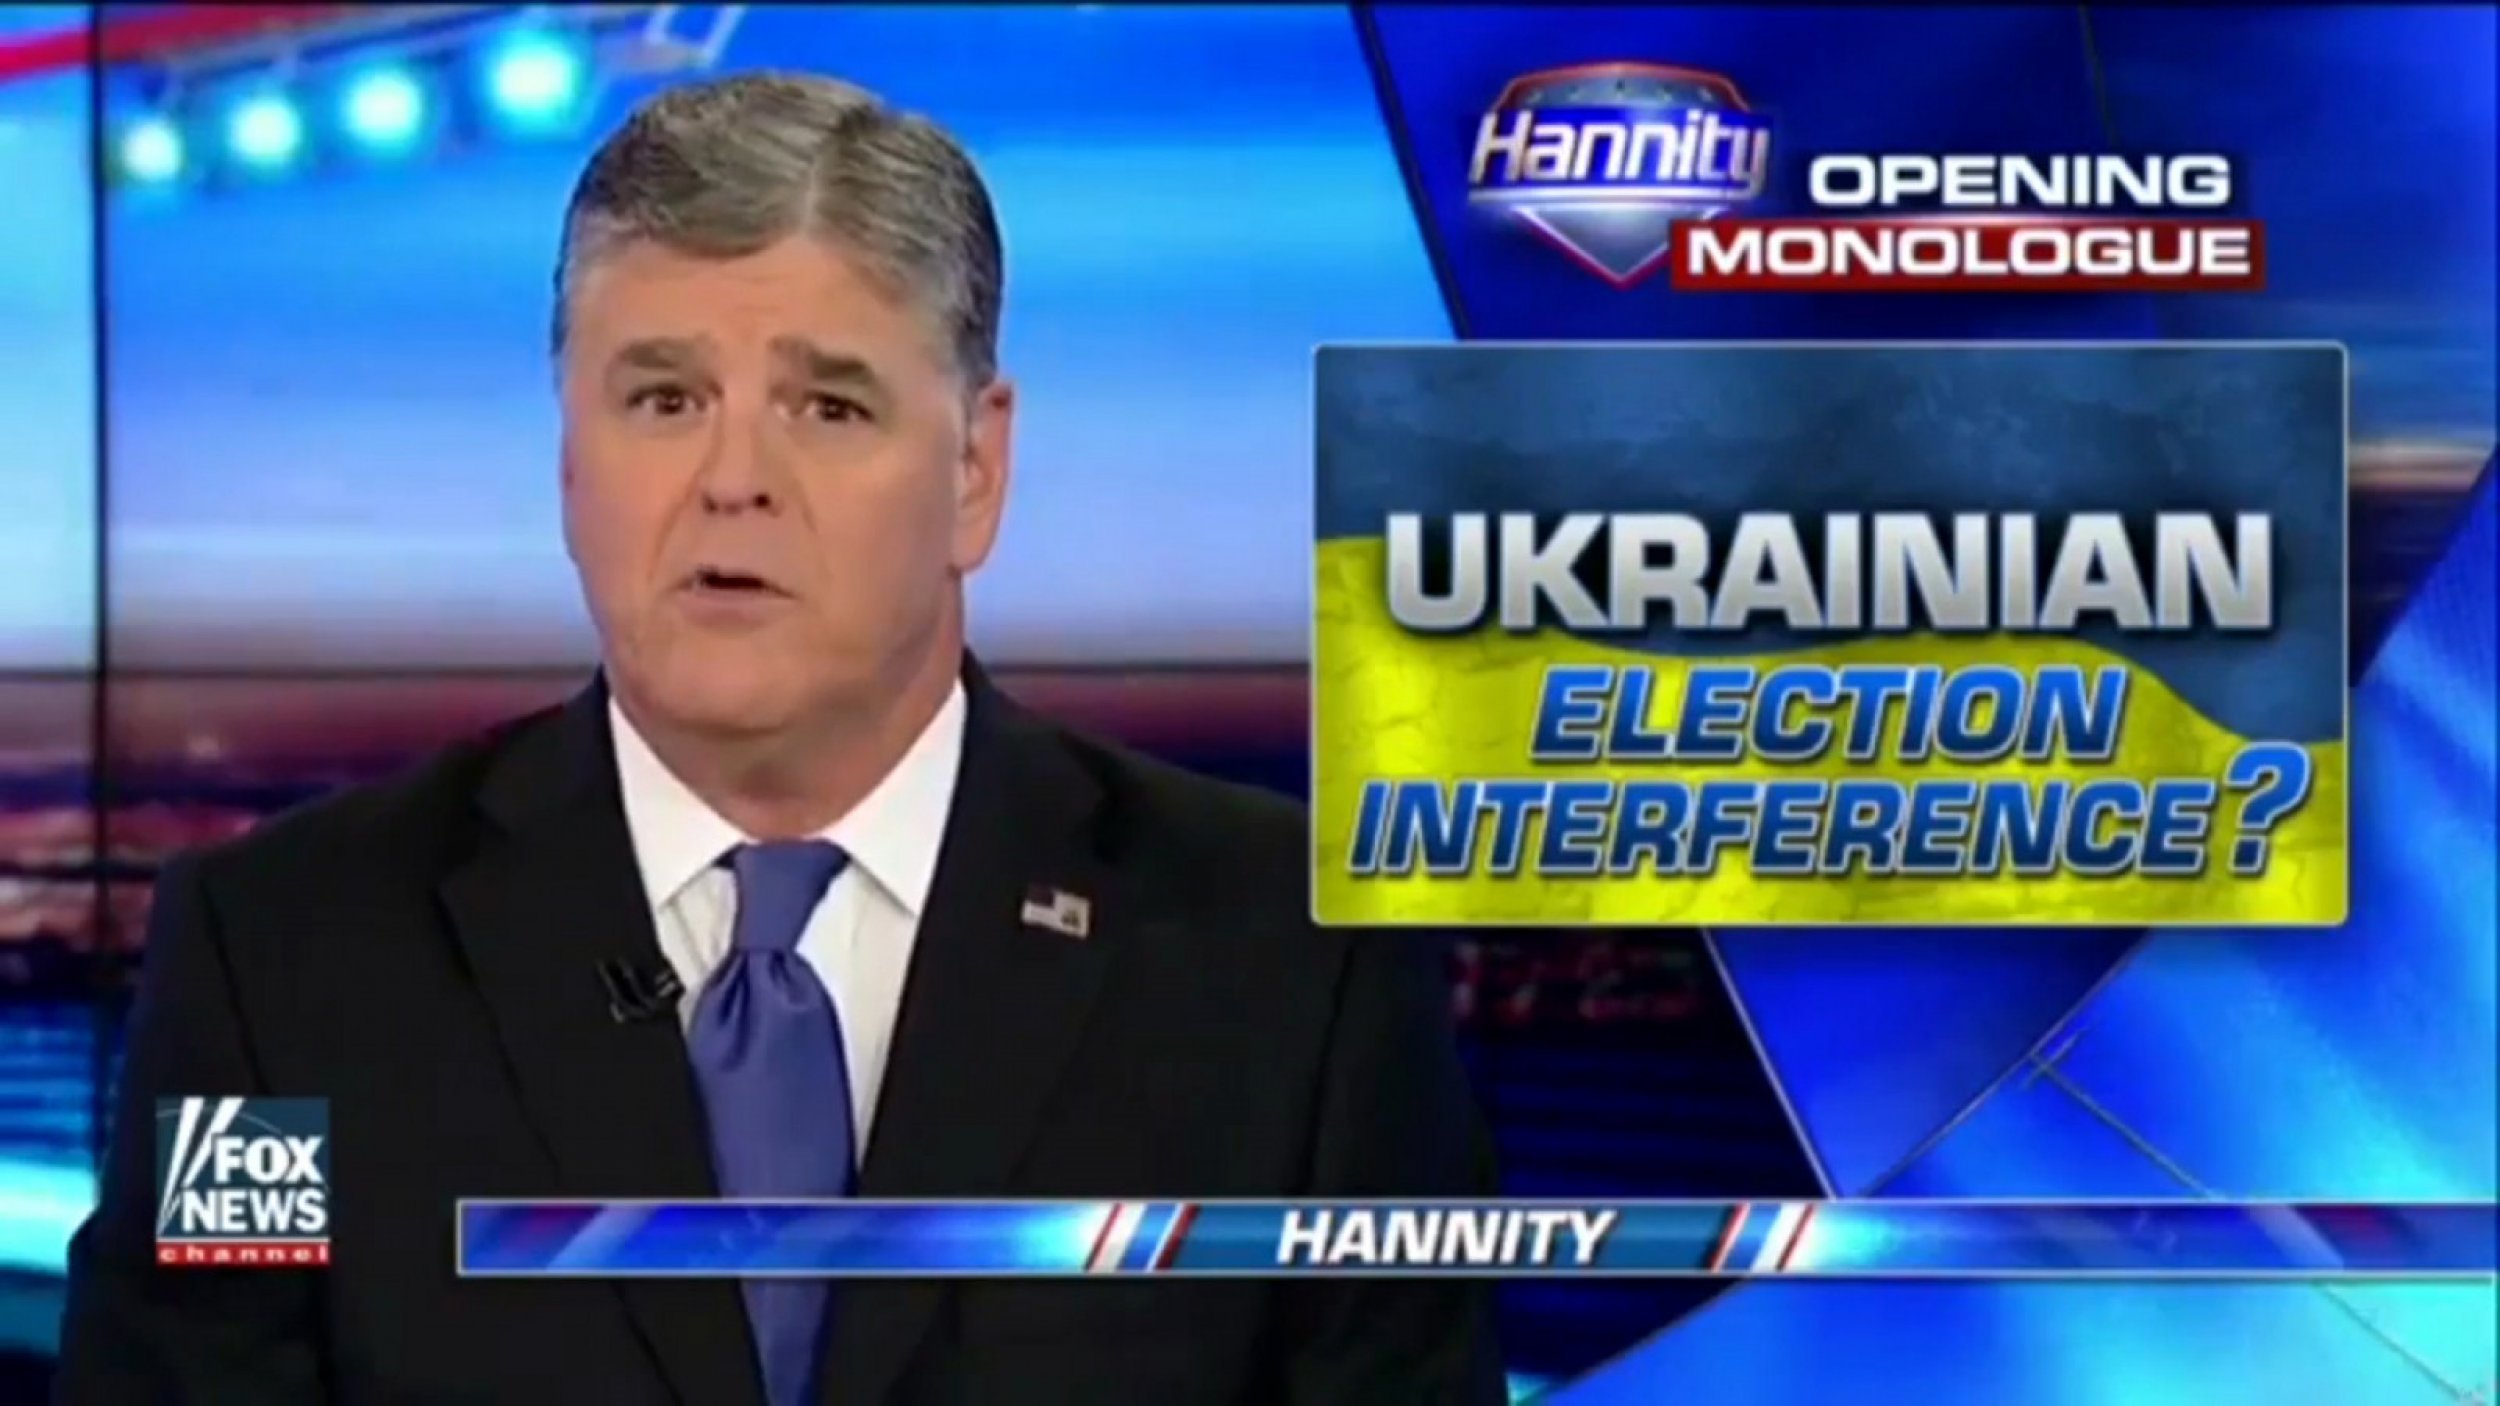 Sean Hannity Claims Ukraine Colluded With Hillary Clinton To Influence 2016 Election